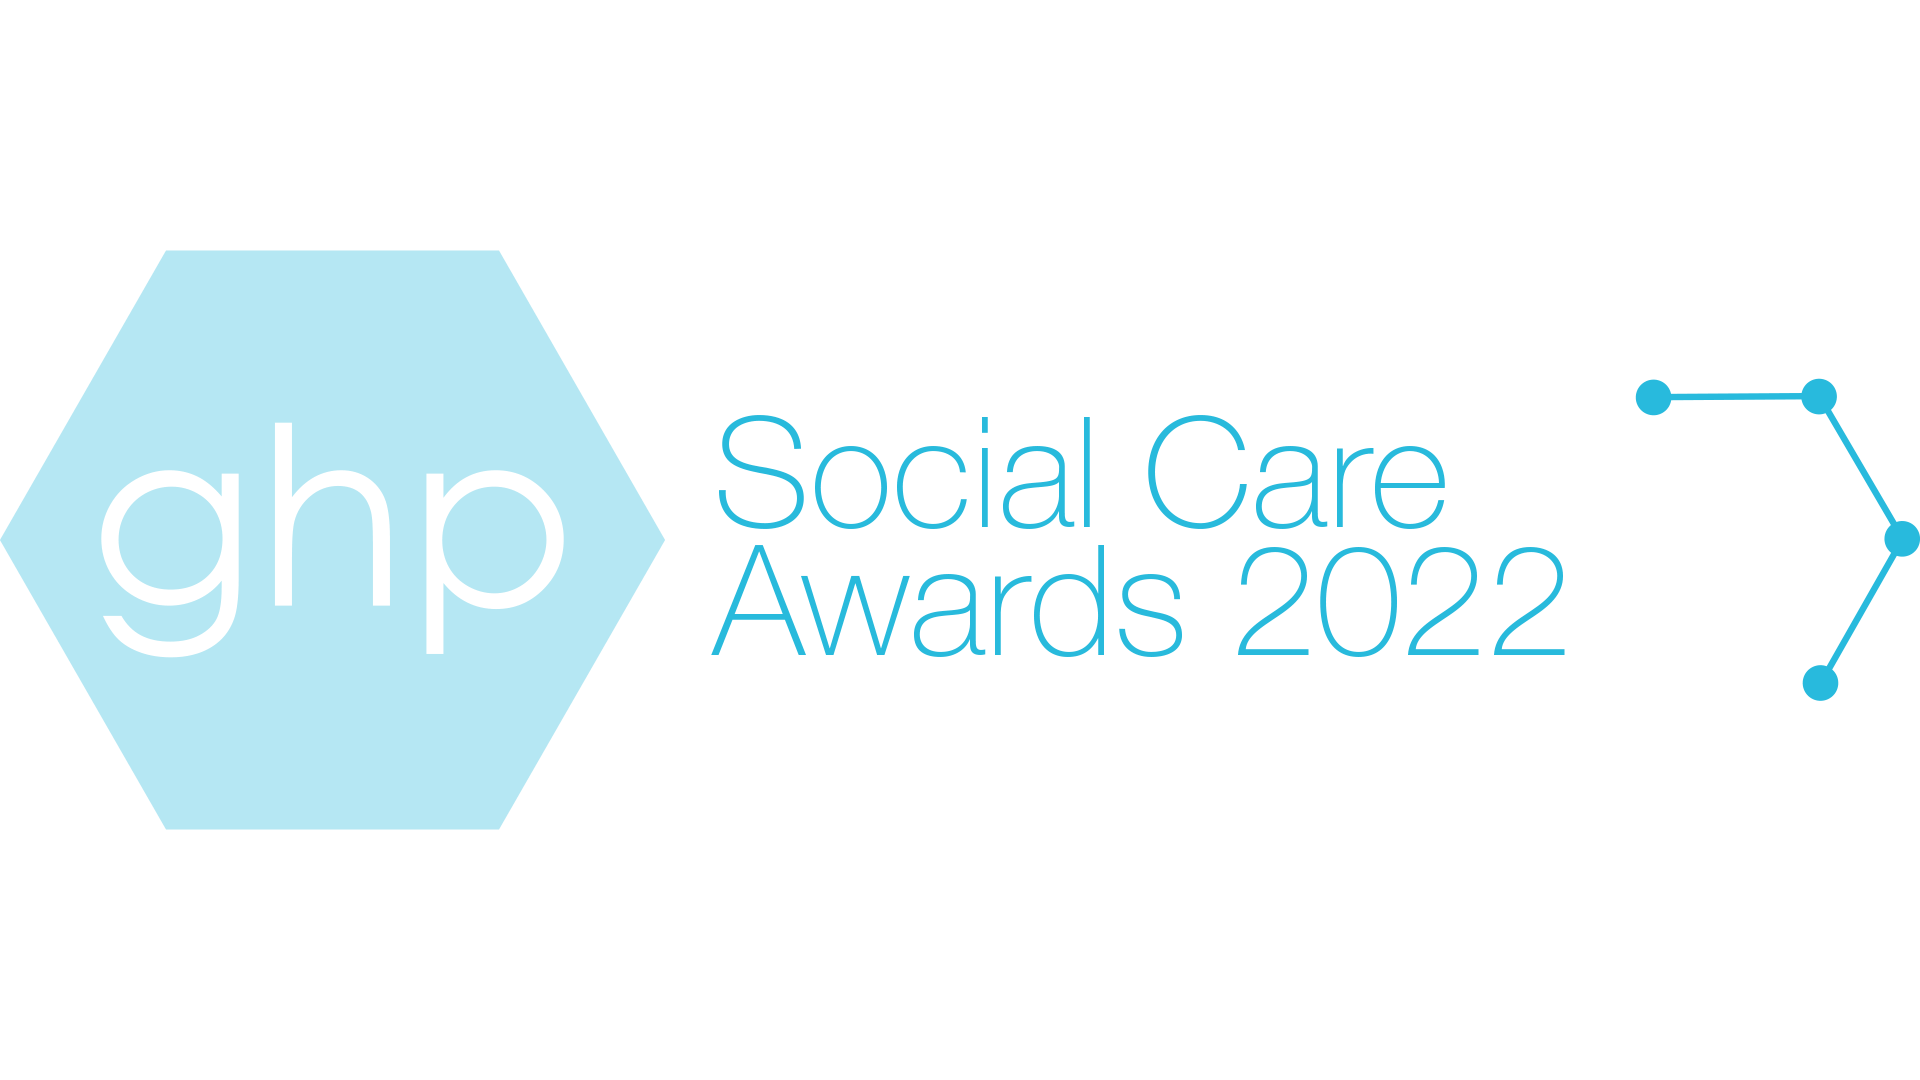 GHP Announces the Winners of the 2022 Social Care Awards